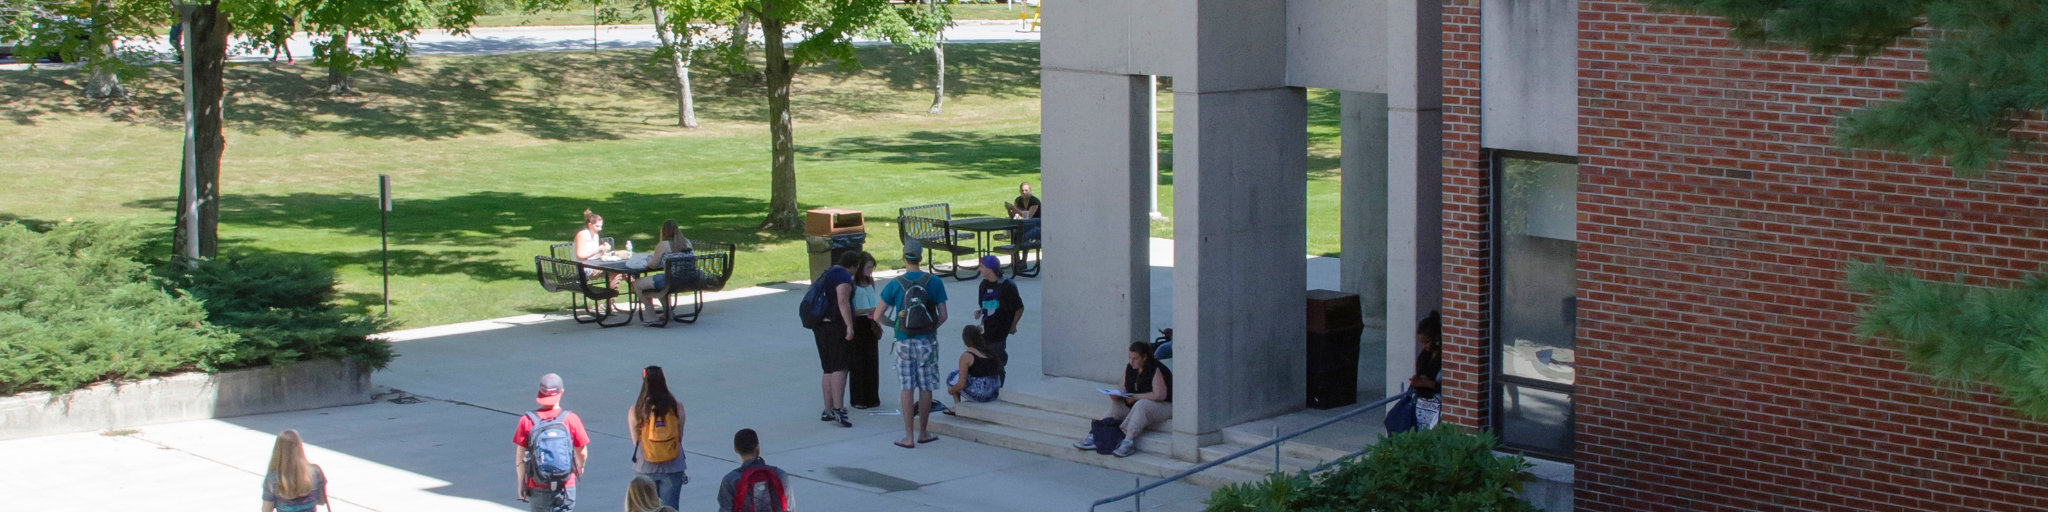 NECC Haverhill Campus in the Summer with Students Gathering